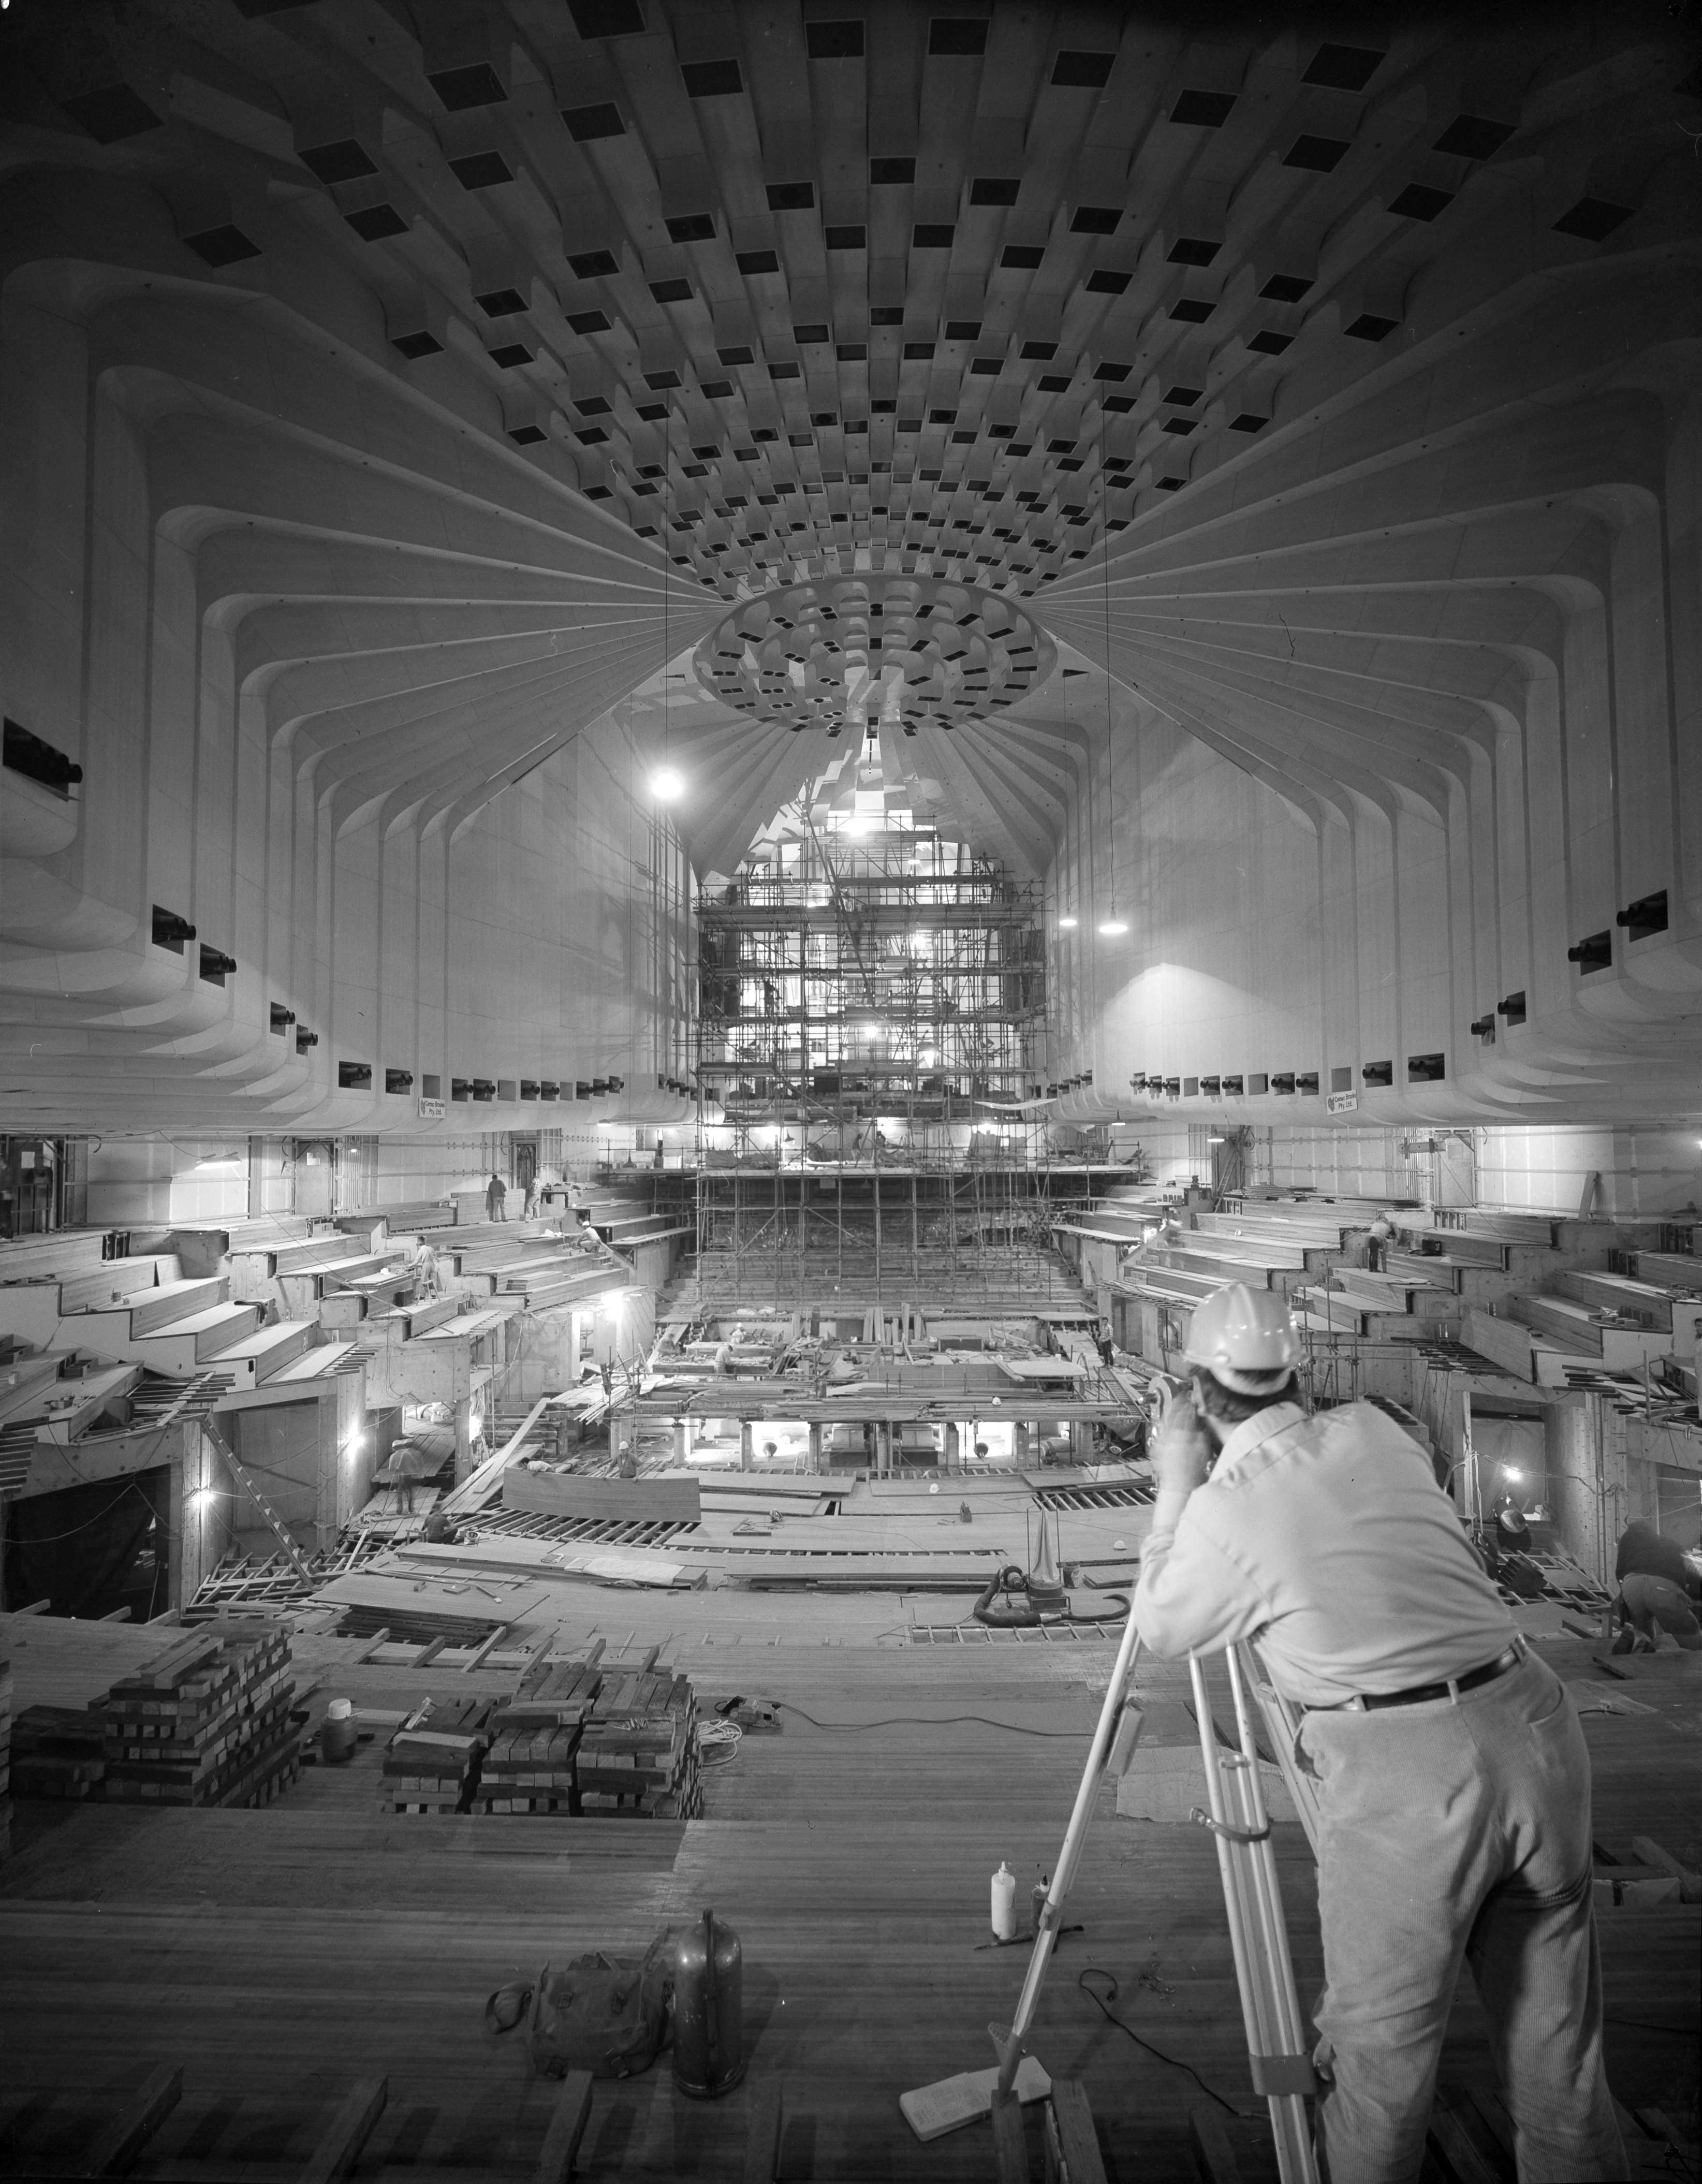 The interior construction of the Concert Hall.